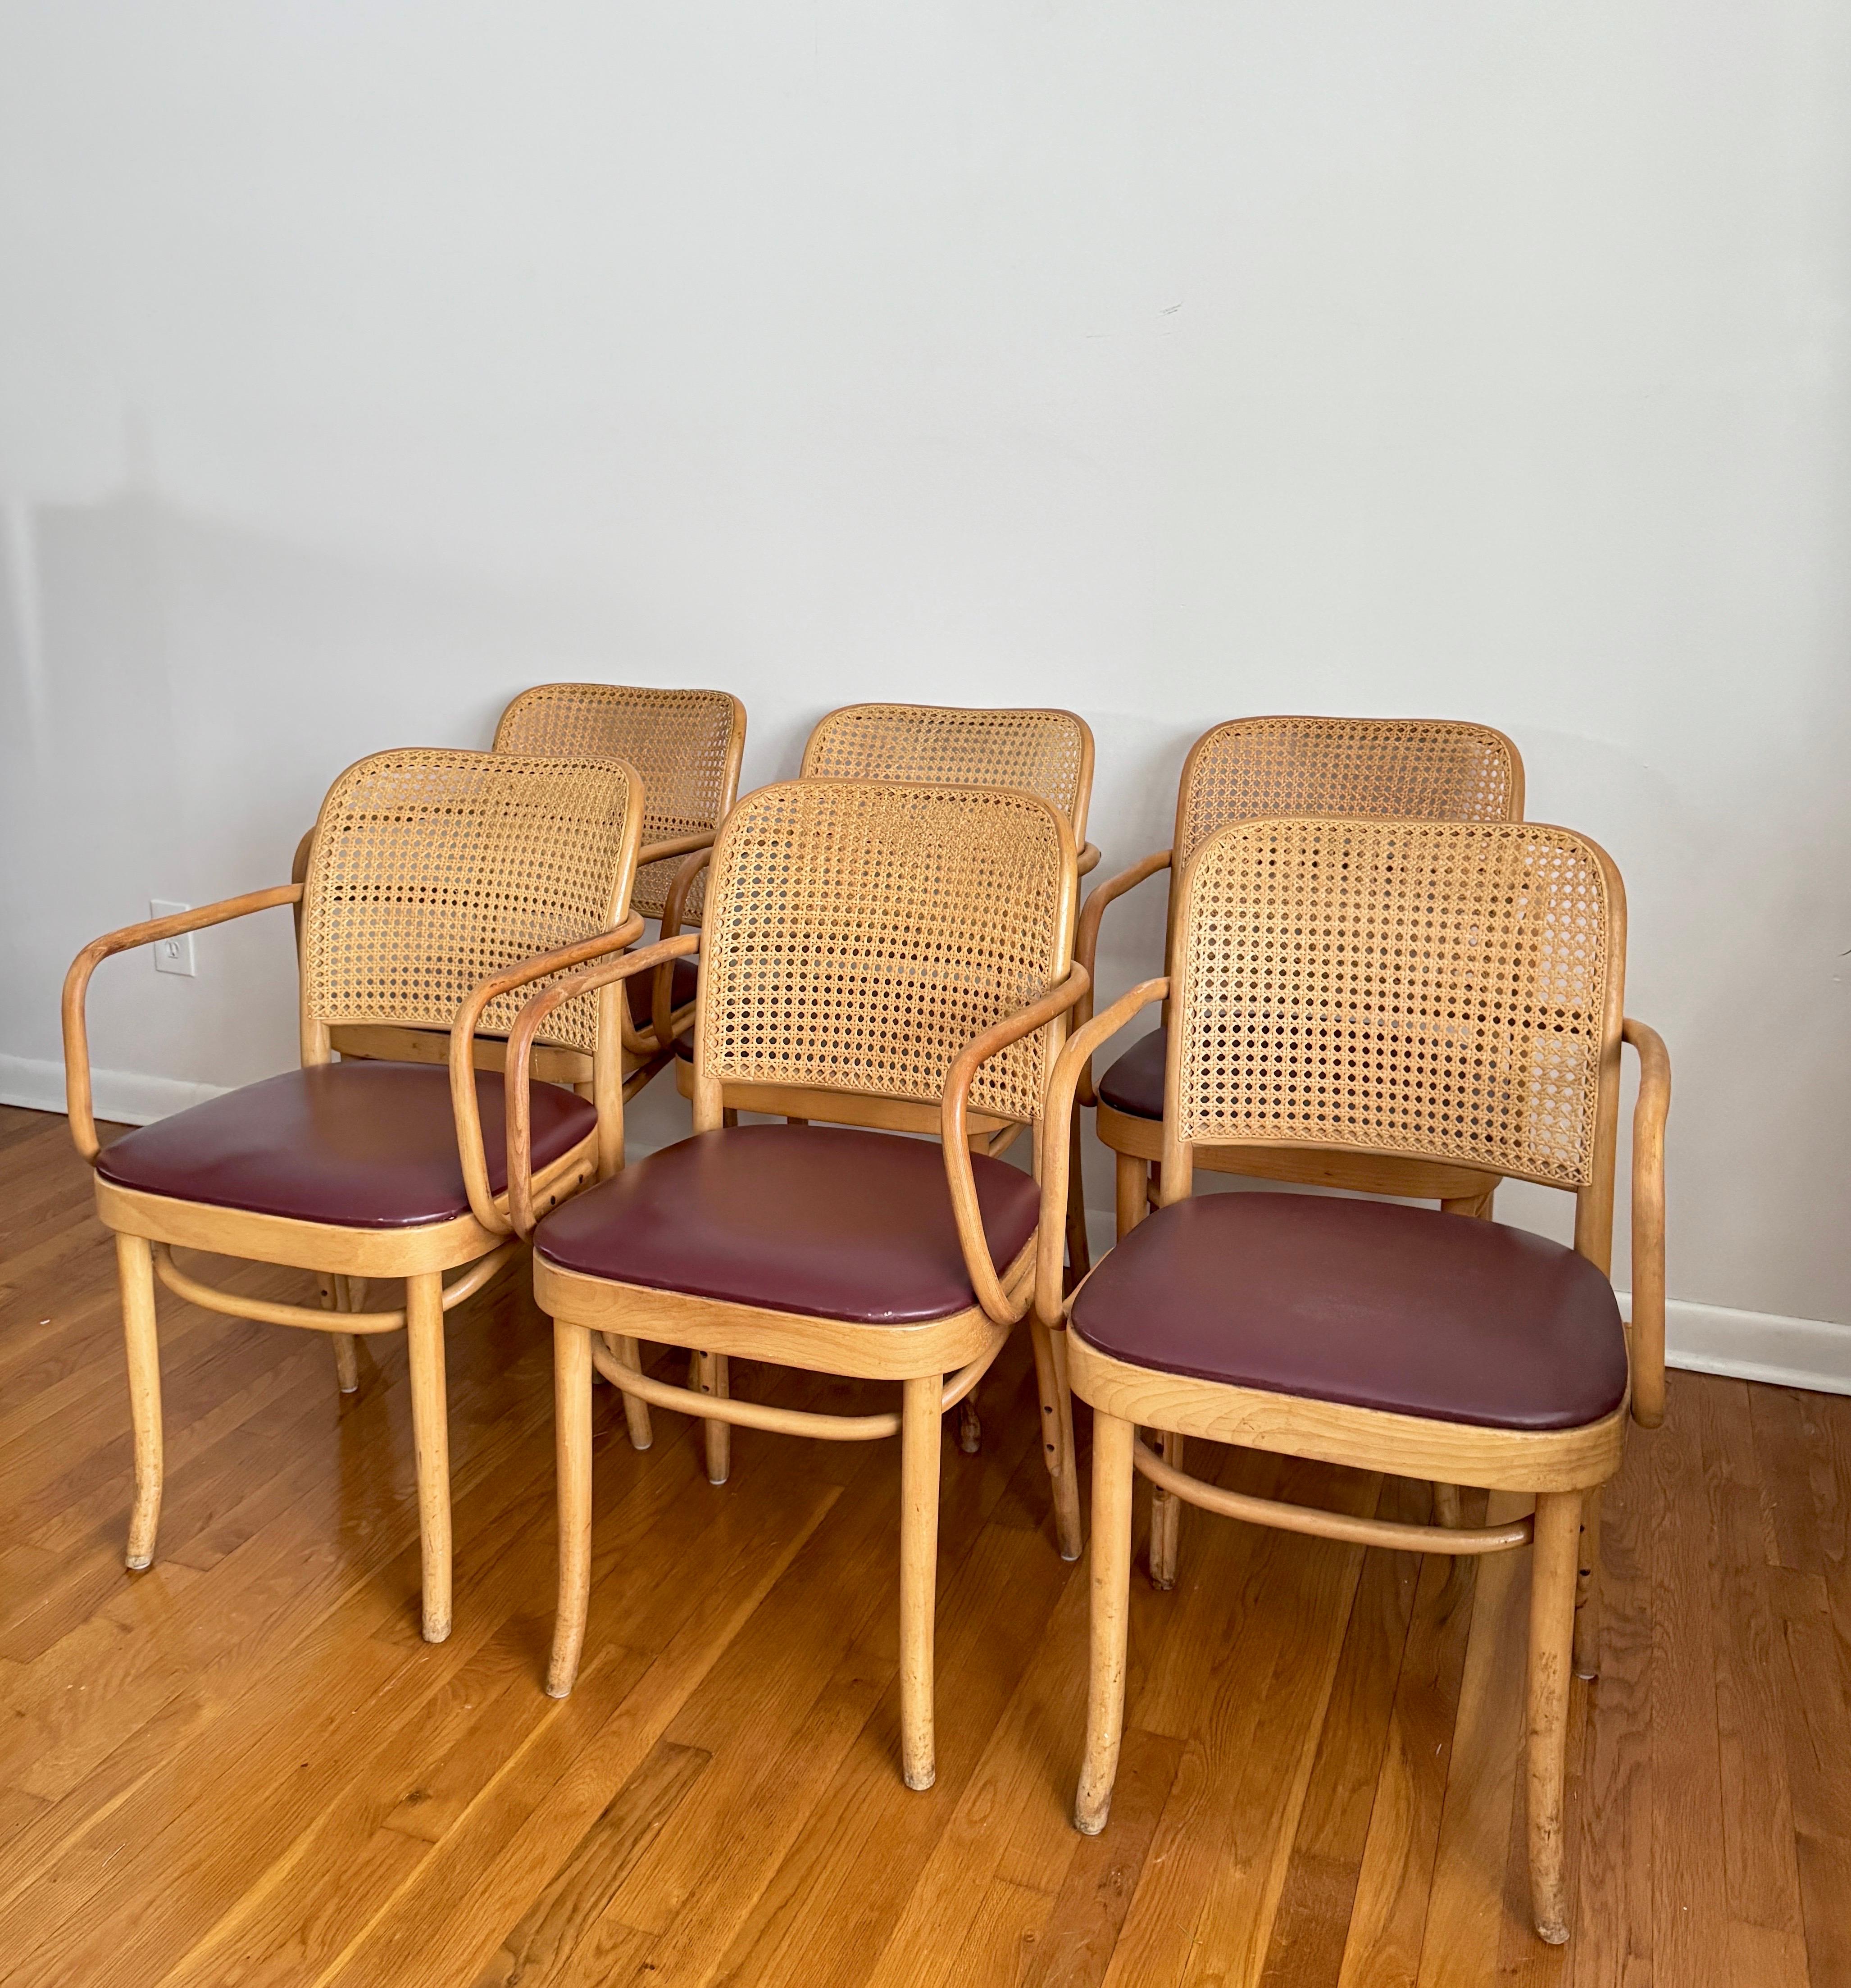 A set of 4 charming dining chairs made of rustic oak with rush seats. These chairs feature ladder-style backs. They are meticulously handcrafted, showcasing a simple yet elegant style with a touch of modern organic aesthetics. less